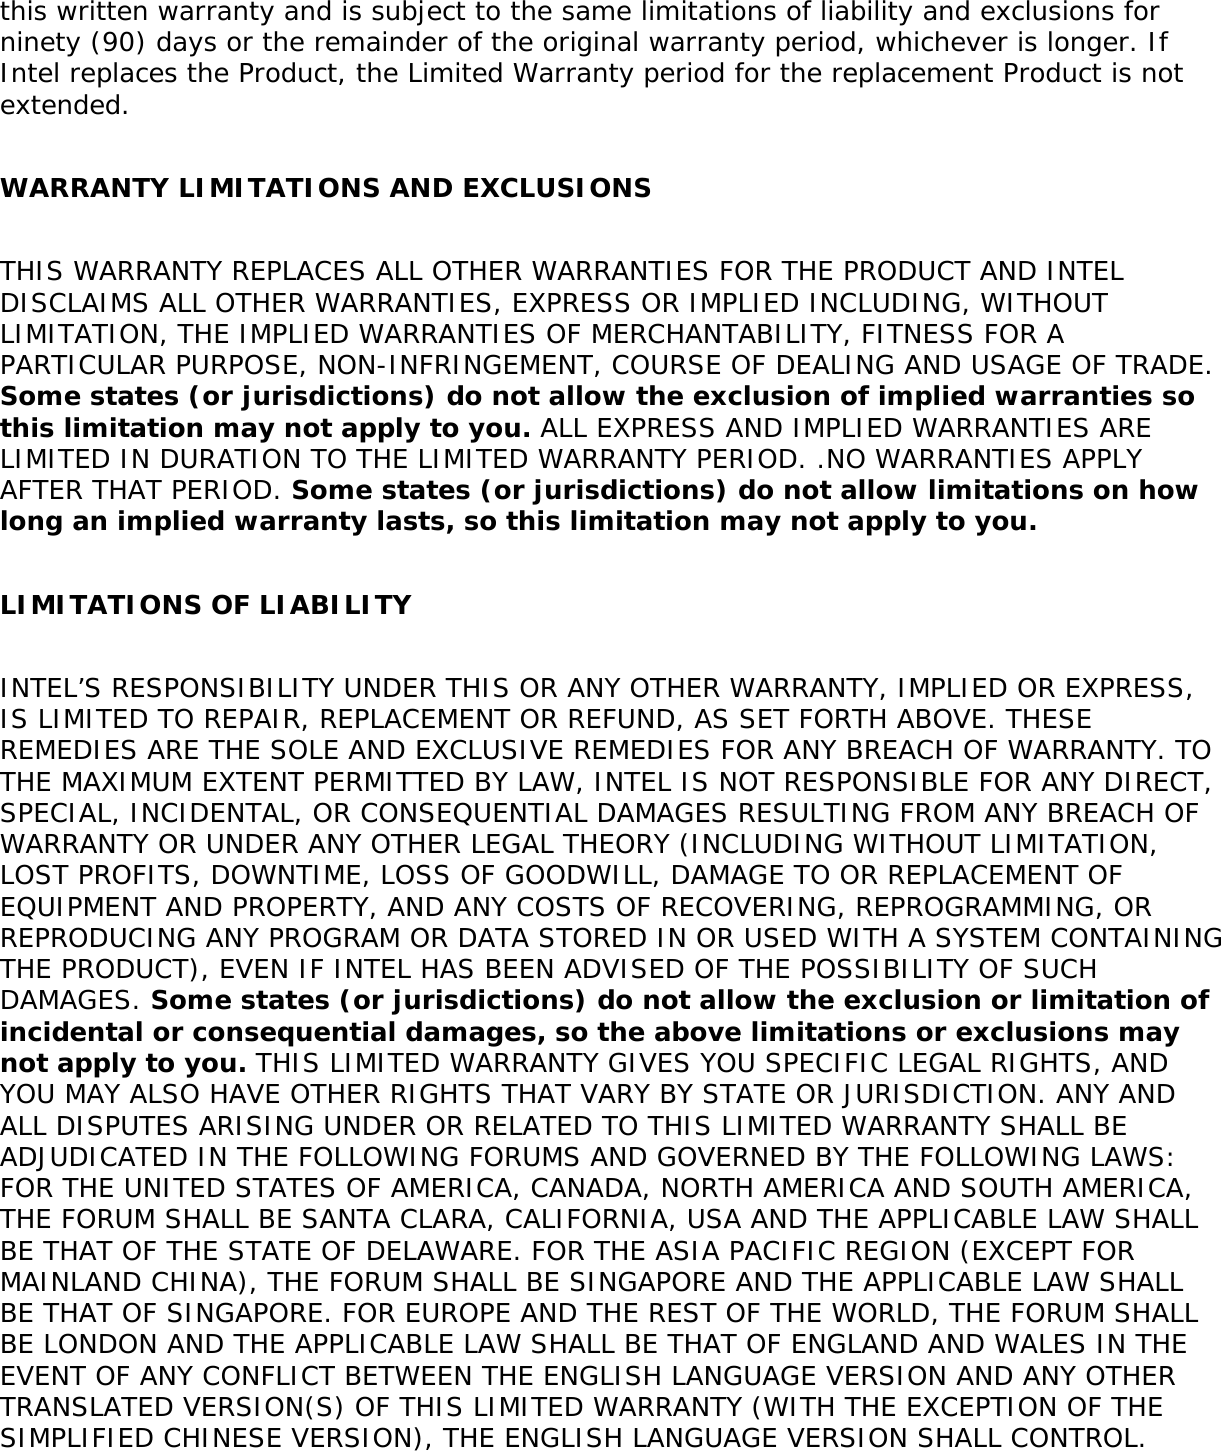 this written warranty and is subject to the same limitations of liability and exclusions for ninety (90) days or the remainder of the original warranty period, whichever is longer. If Intel replaces the Product, the Limited Warranty period for the replacement Product is not extended.   WARRANTY LIMITATIONS AND EXCLUSIONS   THIS WARRANTY REPLACES ALL OTHER WARRANTIES FOR THE PRODUCT AND INTEL DISCLAIMS ALL OTHER WARRANTIES, EXPRESS OR IMPLIED INCLUDING, WITHOUT LIMITATION, THE IMPLIED WARRANTIES OF MERCHANTABILITY, FITNESS FOR A PARTICULAR PURPOSE, NON-INFRINGEMENT, COURSE OF DEALING AND USAGE OF TRADE. Some states (or jurisdictions) do not allow the exclusion of implied warranties so this limitation may not apply to you. ALL EXPRESS AND IMPLIED WARRANTIES ARE LIMITED IN DURATION TO THE LIMITED WARRANTY PERIOD. .NO WARRANTIES APPLY AFTER THAT PERIOD. Some states (or jurisdictions) do not allow limitations on how long an implied warranty lasts, so this limitation may not apply to you.   LIMITATIONS OF LIABILITY   INTEL’S RESPONSIBILITY UNDER THIS OR ANY OTHER WARRANTY, IMPLIED OR EXPRESS, IS LIMITED TO REPAIR, REPLACEMENT OR REFUND, AS SET FORTH ABOVE. THESE REMEDIES ARE THE SOLE AND EXCLUSIVE REMEDIES FOR ANY BREACH OF WARRANTY. TO THE MAXIMUM EXTENT PERMITTED BY LAW, INTEL IS NOT RESPONSIBLE FOR ANY DIRECT, SPECIAL, INCIDENTAL, OR CONSEQUENTIAL DAMAGES RESULTING FROM ANY BREACH OF WARRANTY OR UNDER ANY OTHER LEGAL THEORY (INCLUDING WITHOUT LIMITATION, LOST PROFITS, DOWNTIME, LOSS OF GOODWILL, DAMAGE TO OR REPLACEMENT OF EQUIPMENT AND PROPERTY, AND ANY COSTS OF RECOVERING, REPROGRAMMING, OR REPRODUCING ANY PROGRAM OR DATA STORED IN OR USED WITH A SYSTEM CONTAINING THE PRODUCT), EVEN IF INTEL HAS BEEN ADVISED OF THE POSSIBILITY OF SUCH DAMAGES. Some states (or jurisdictions) do not allow the exclusion or limitation of incidental or consequential damages, so the above limitations or exclusions may not apply to you. THIS LIMITED WARRANTY GIVES YOU SPECIFIC LEGAL RIGHTS, AND YOU MAY ALSO HAVE OTHER RIGHTS THAT VARY BY STATE OR JURISDICTION. ANY AND ALL DISPUTES ARISING UNDER OR RELATED TO THIS LIMITED WARRANTY SHALL BE ADJUDICATED IN THE FOLLOWING FORUMS AND GOVERNED BY THE FOLLOWING LAWS: FOR THE UNITED STATES OF AMERICA, CANADA, NORTH AMERICA AND SOUTH AMERICA, THE FORUM SHALL BE SANTA CLARA, CALIFORNIA, USA AND THE APPLICABLE LAW SHALL BE THAT OF THE STATE OF DELAWARE. FOR THE ASIA PACIFIC REGION (EXCEPT FOR MAINLAND CHINA), THE FORUM SHALL BE SINGAPORE AND THE APPLICABLE LAW SHALL BE THAT OF SINGAPORE. FOR EUROPE AND THE REST OF THE WORLD, THE FORUM SHALL BE LONDON AND THE APPLICABLE LAW SHALL BE THAT OF ENGLAND AND WALES IN THE EVENT OF ANY CONFLICT BETWEEN THE ENGLISH LANGUAGE VERSION AND ANY OTHER TRANSLATED VERSION(S) OF THIS LIMITED WARRANTY (WITH THE EXCEPTION OF THE SIMPLIFIED CHINESE VERSION), THE ENGLISH LANGUAGE VERSION SHALL CONTROL.   